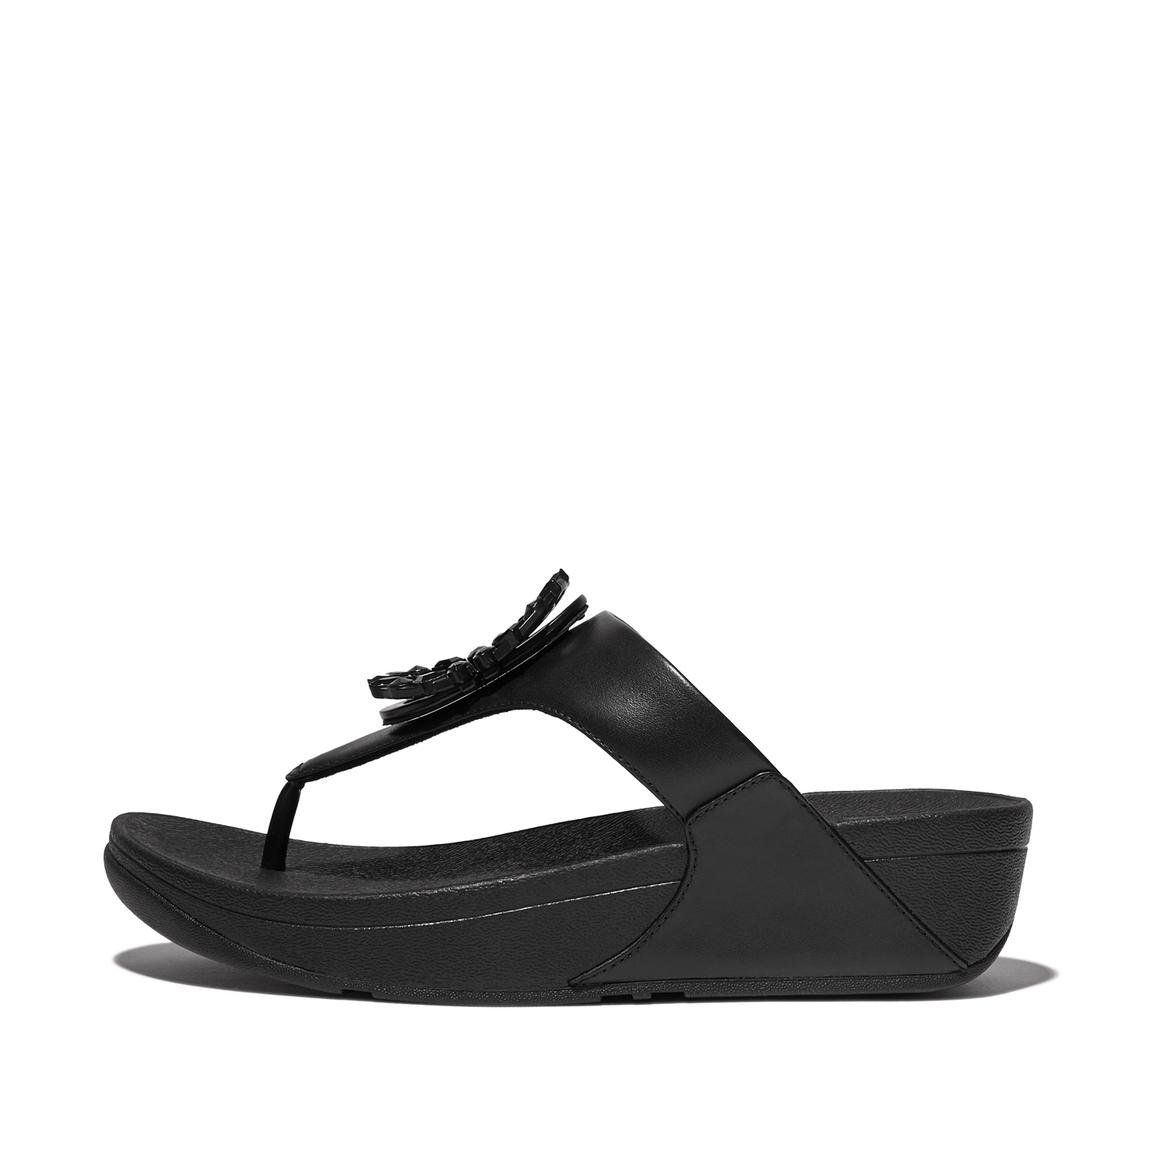 Crystal-Circlet Leather Toe-Post Sandals